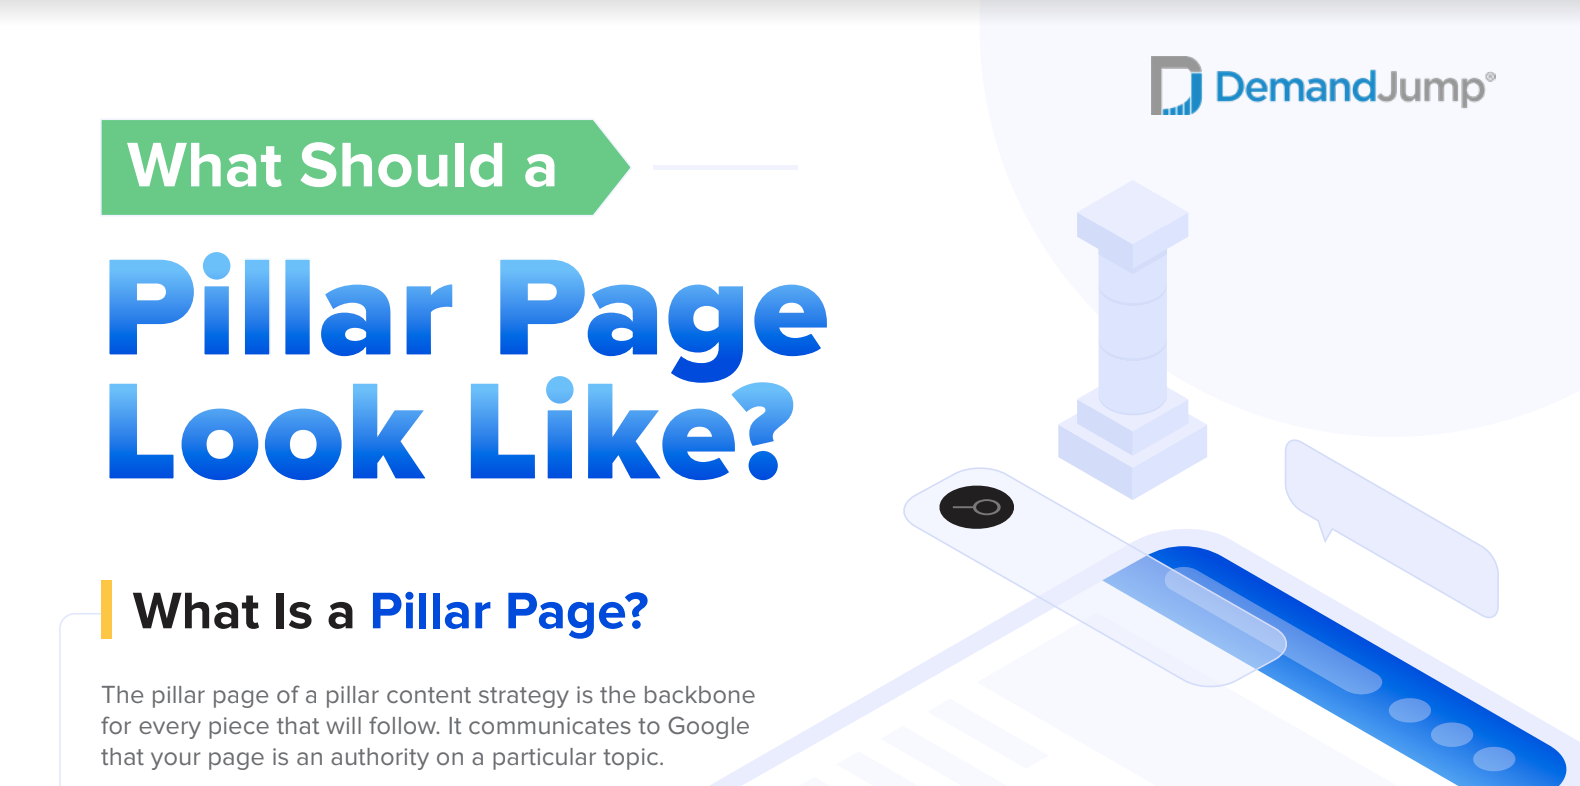 What Should a Pillar Page Look Like?